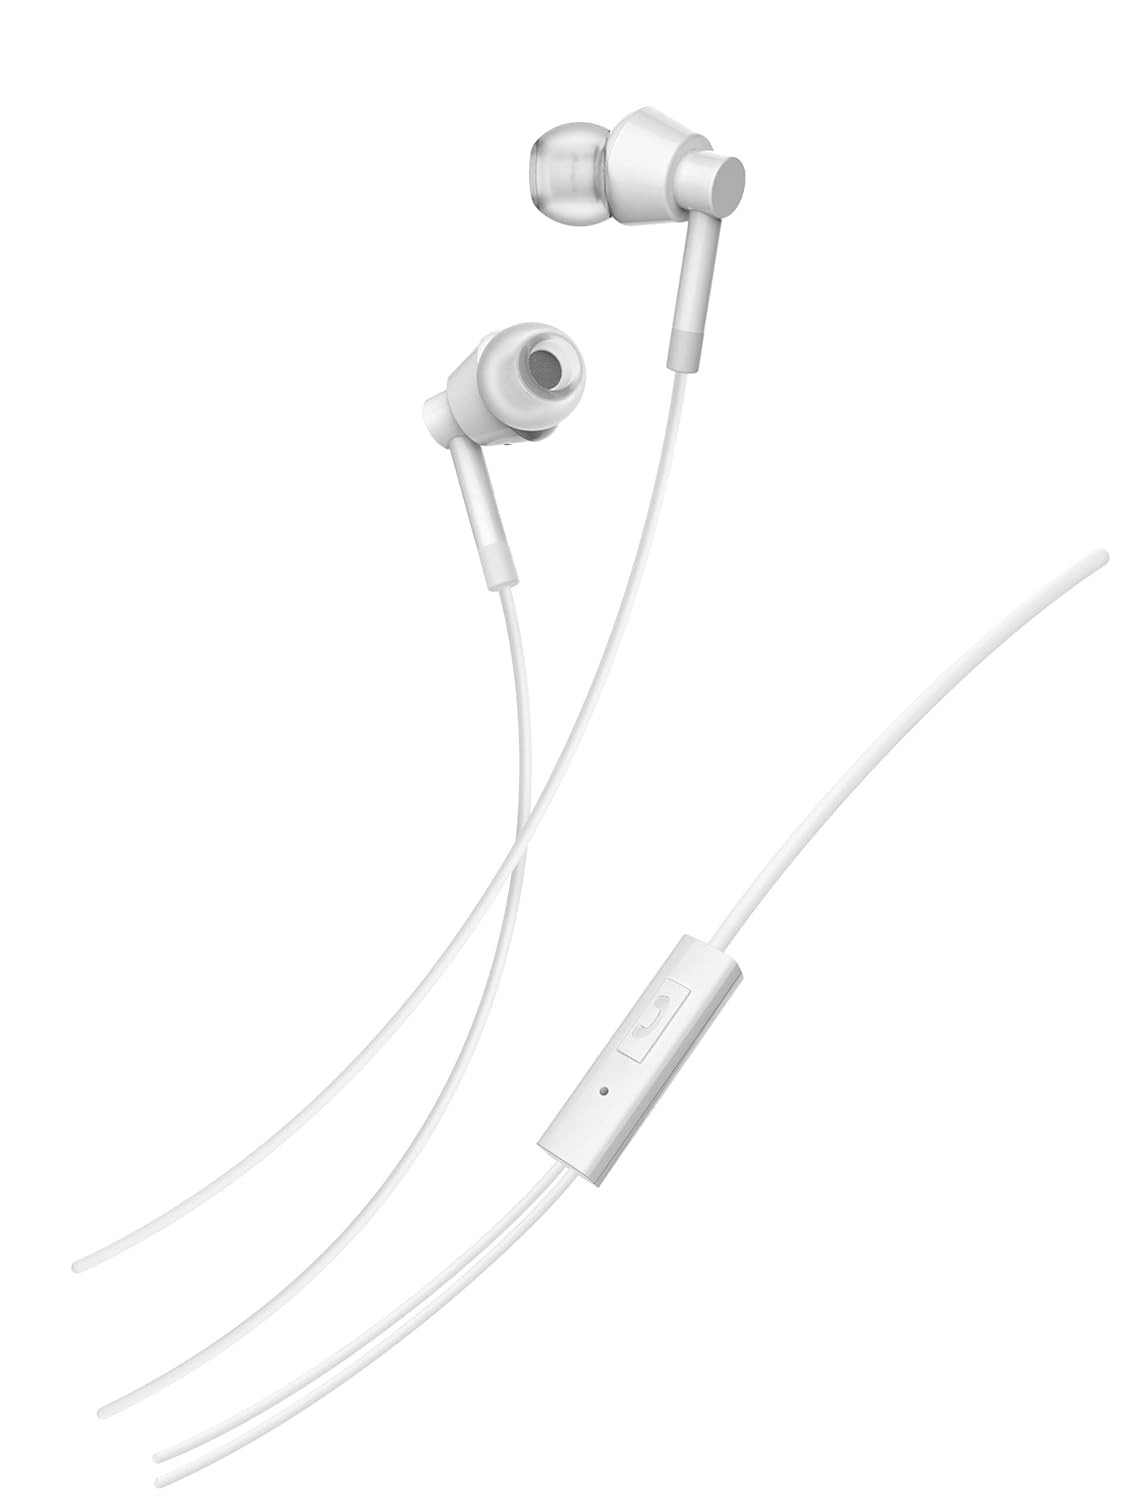 Nokia Buds (Wb-101) Wired in Ear Earphones with Mic with Powerful Bass Performance for Clear Voice Calls, Virtual Assistant Control Enabled. Angled Acoustic Tubes for Comfortable Secure Fit, White